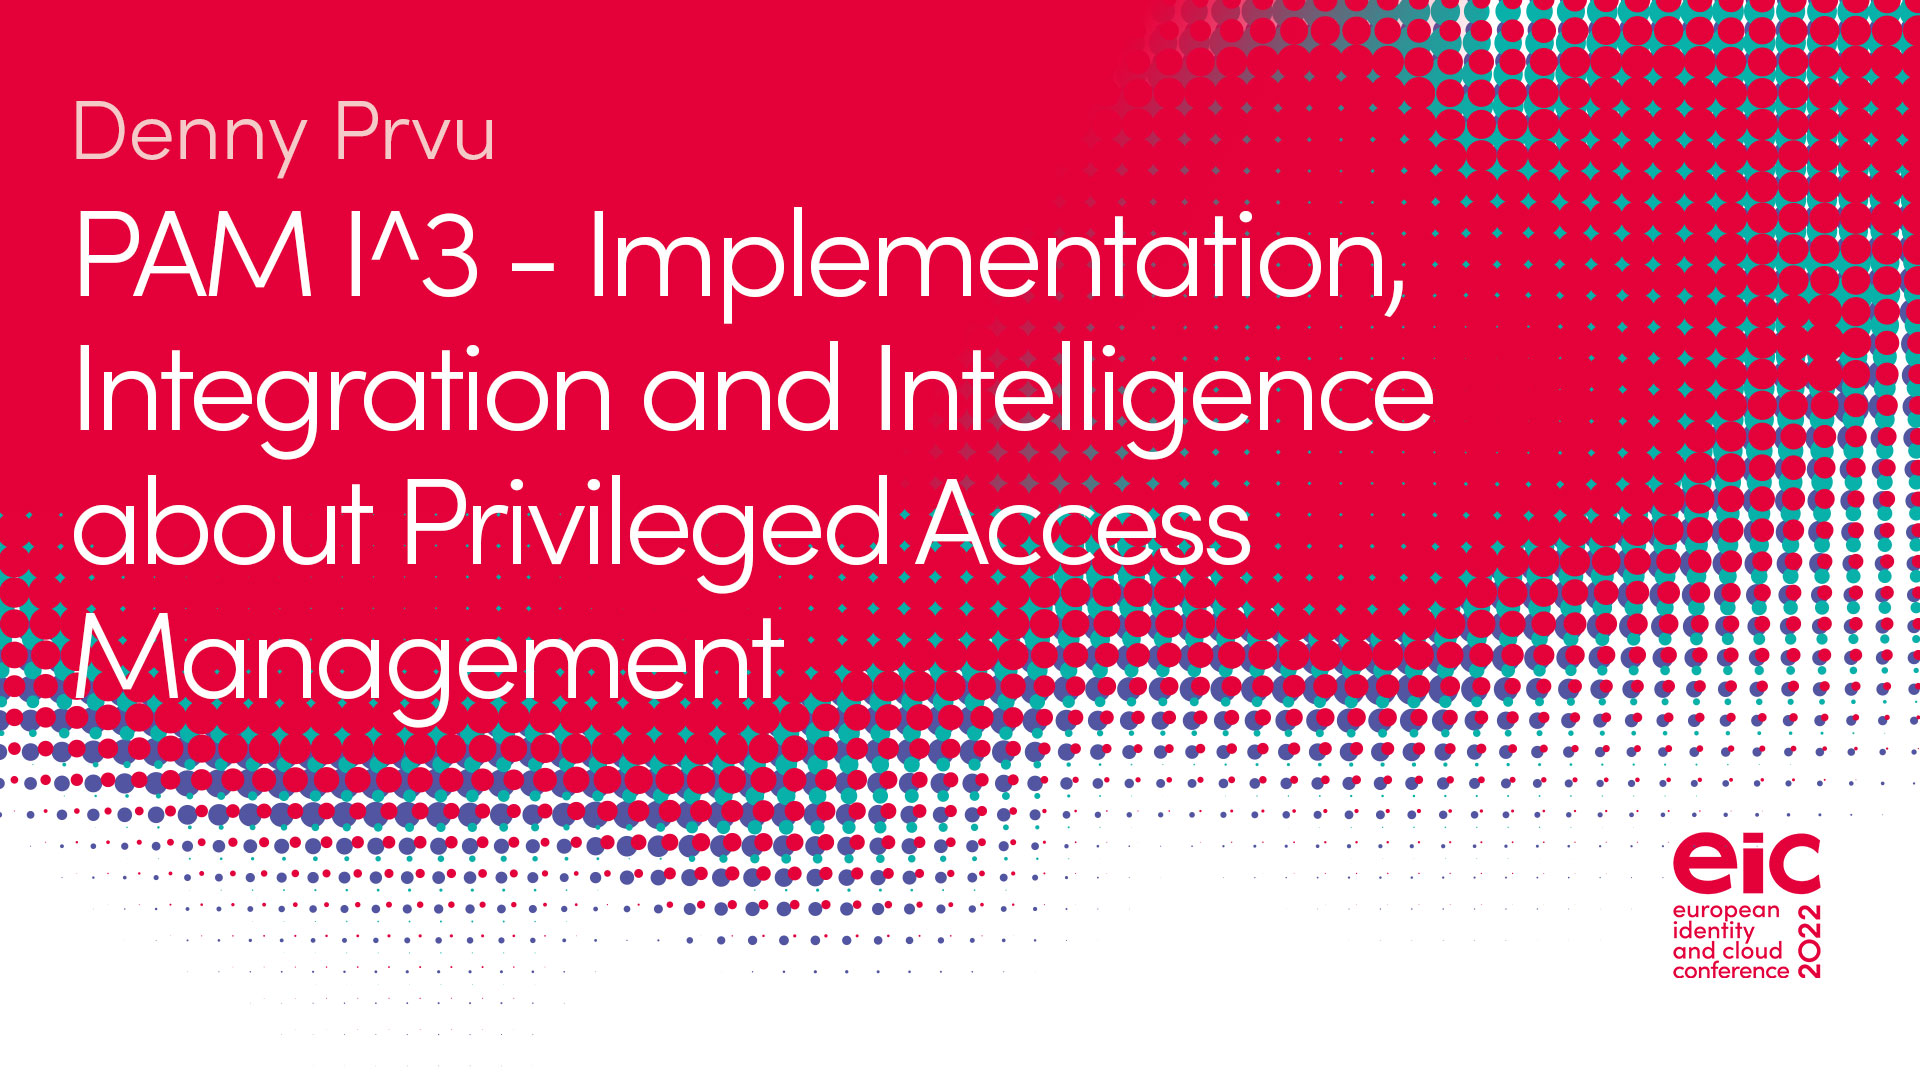 PAM I^3  - Implementation, Integration and Intelligence about Privileged Access Management